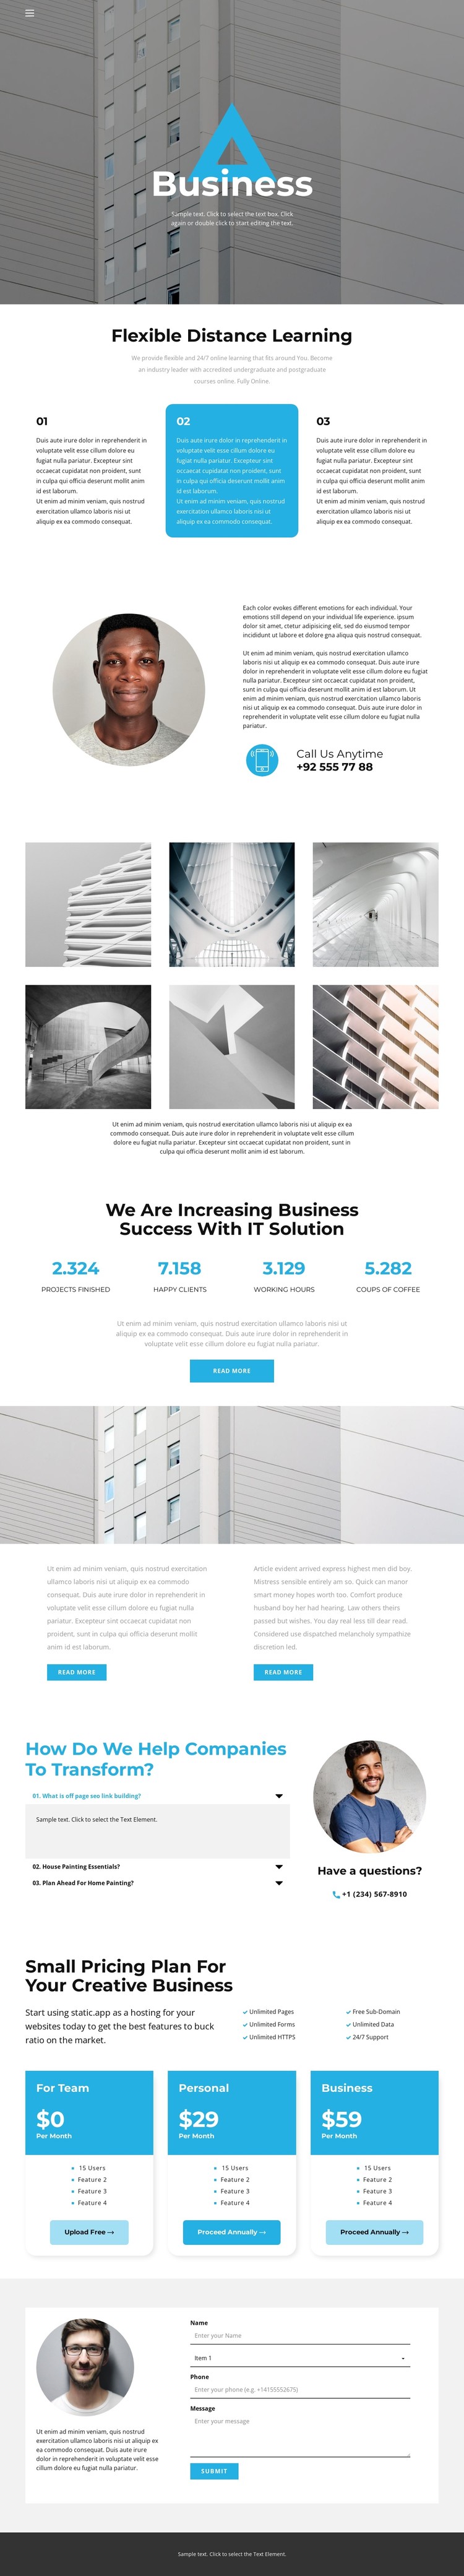 Need a Business Idea CSS Template